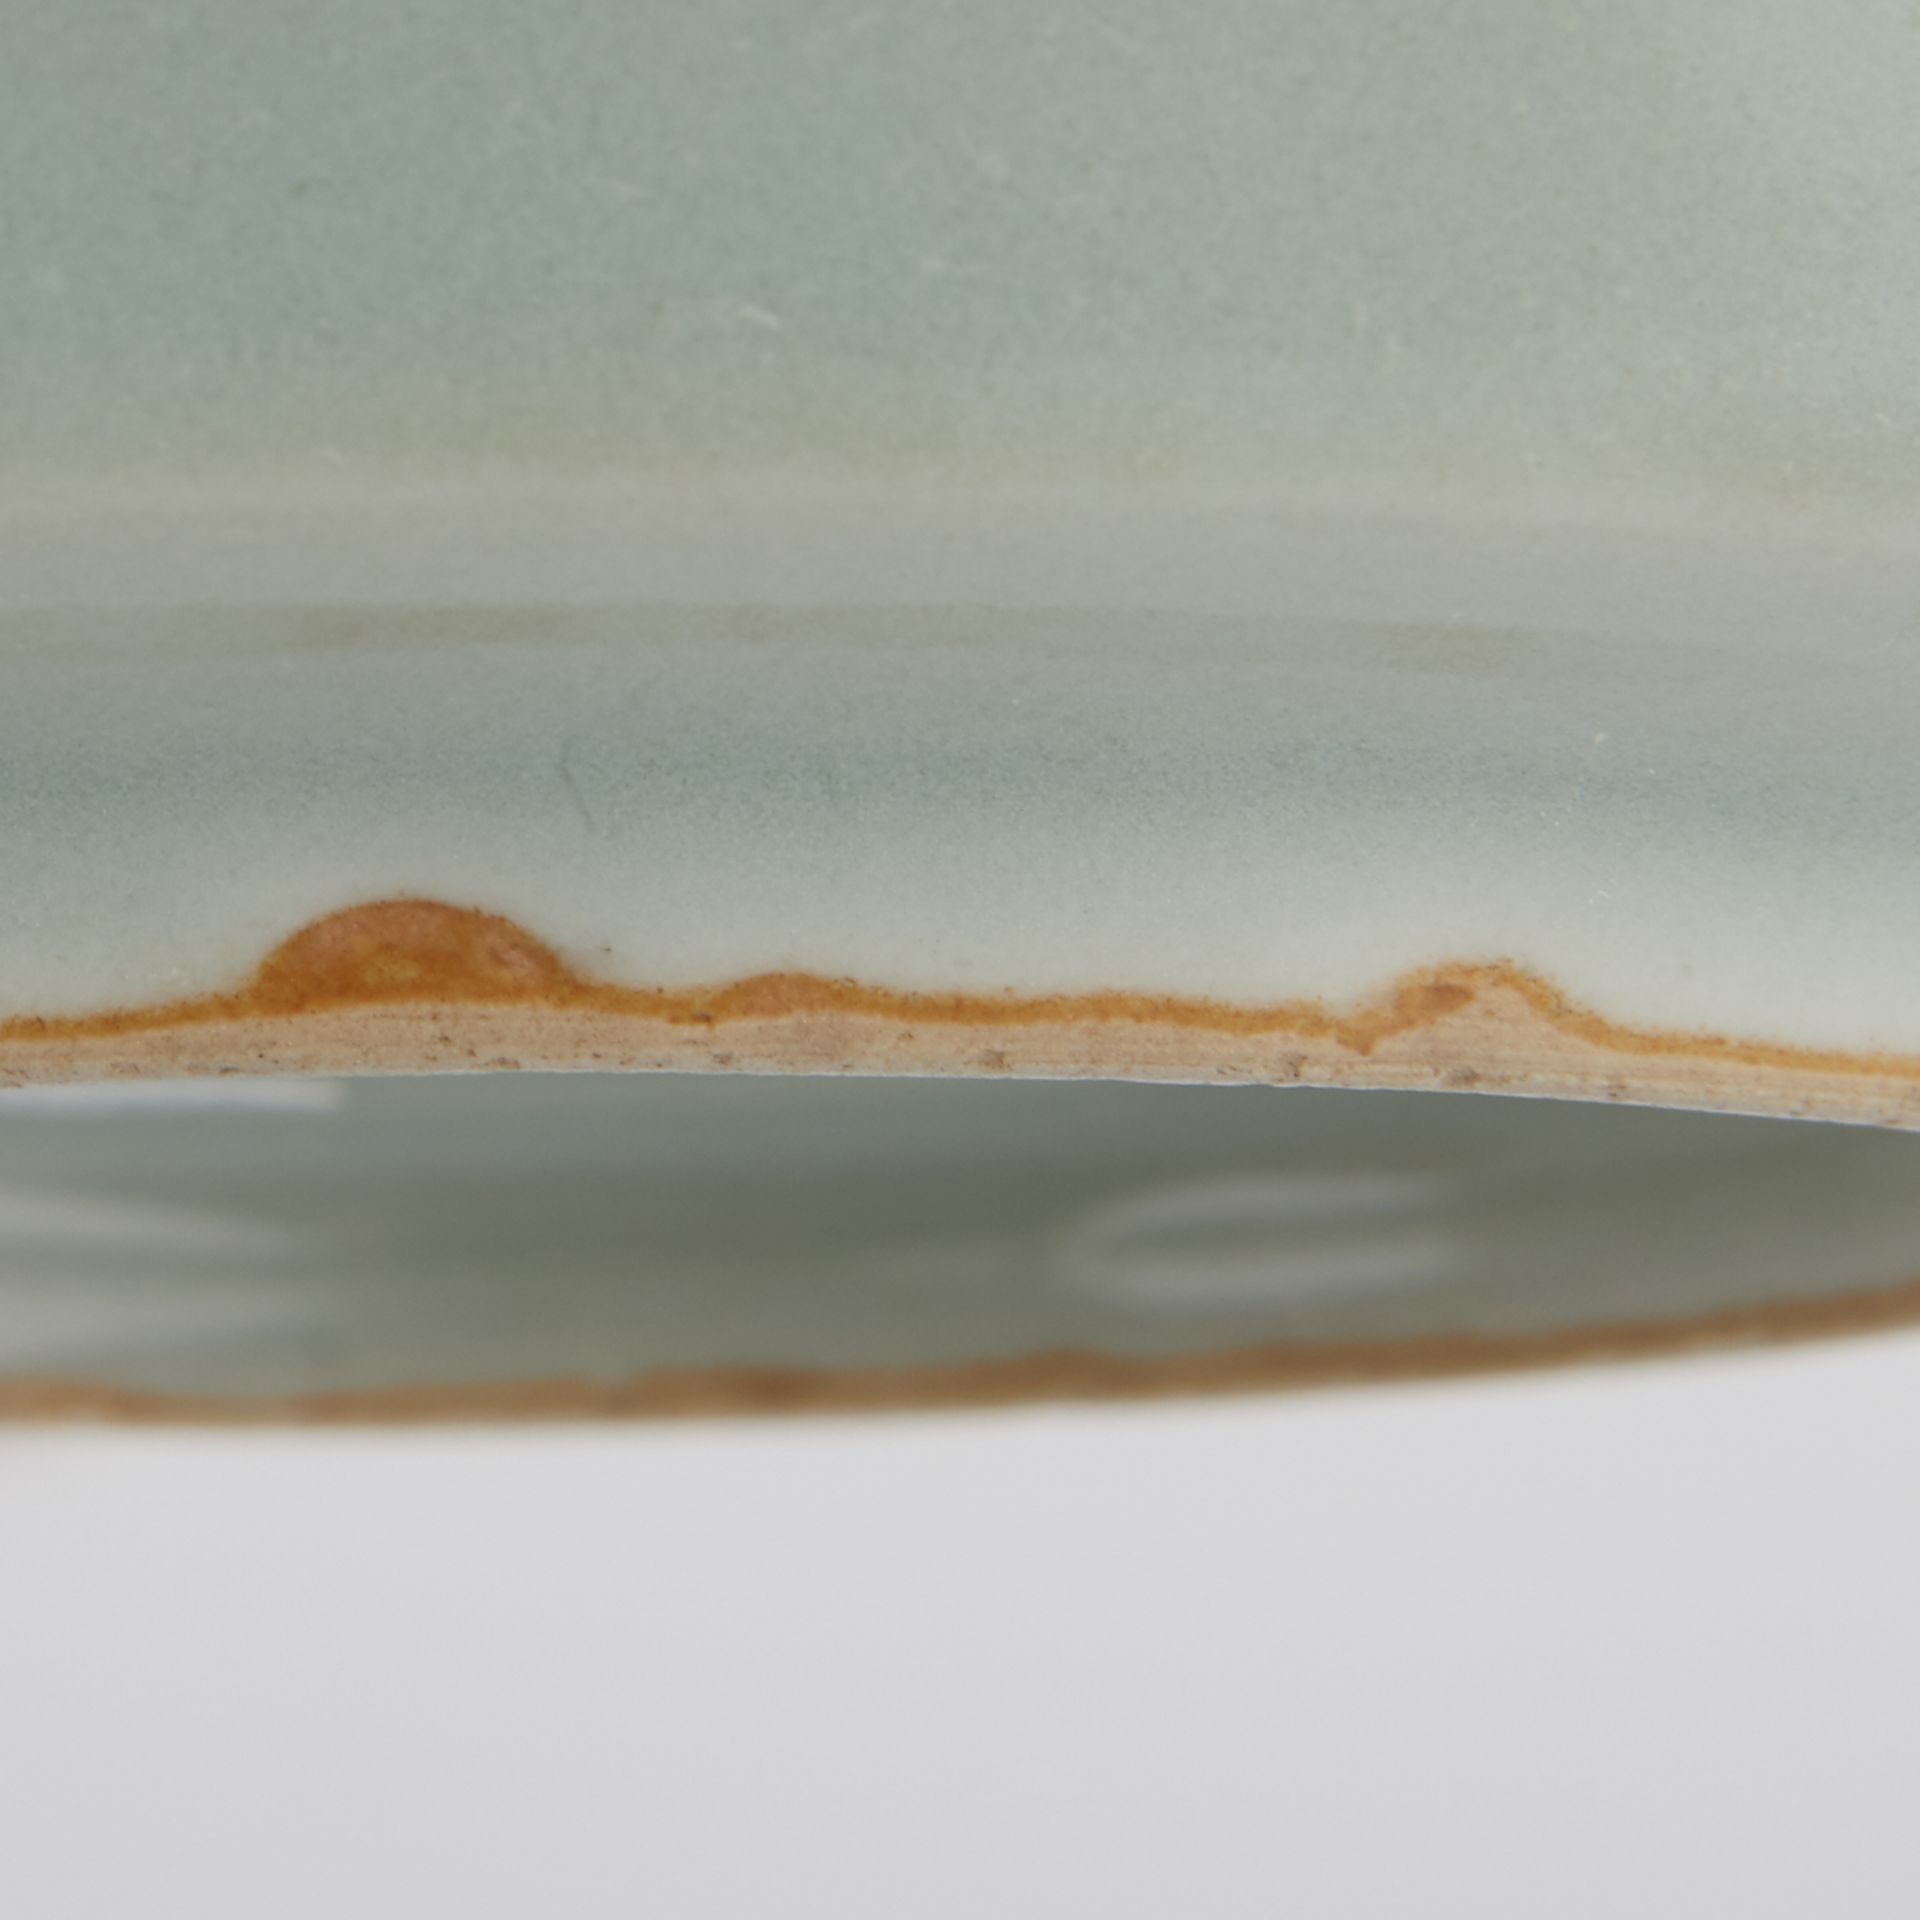 Early Chinese Celadon Porcelain Bowl - Likely Yuan - Image 4 of 9